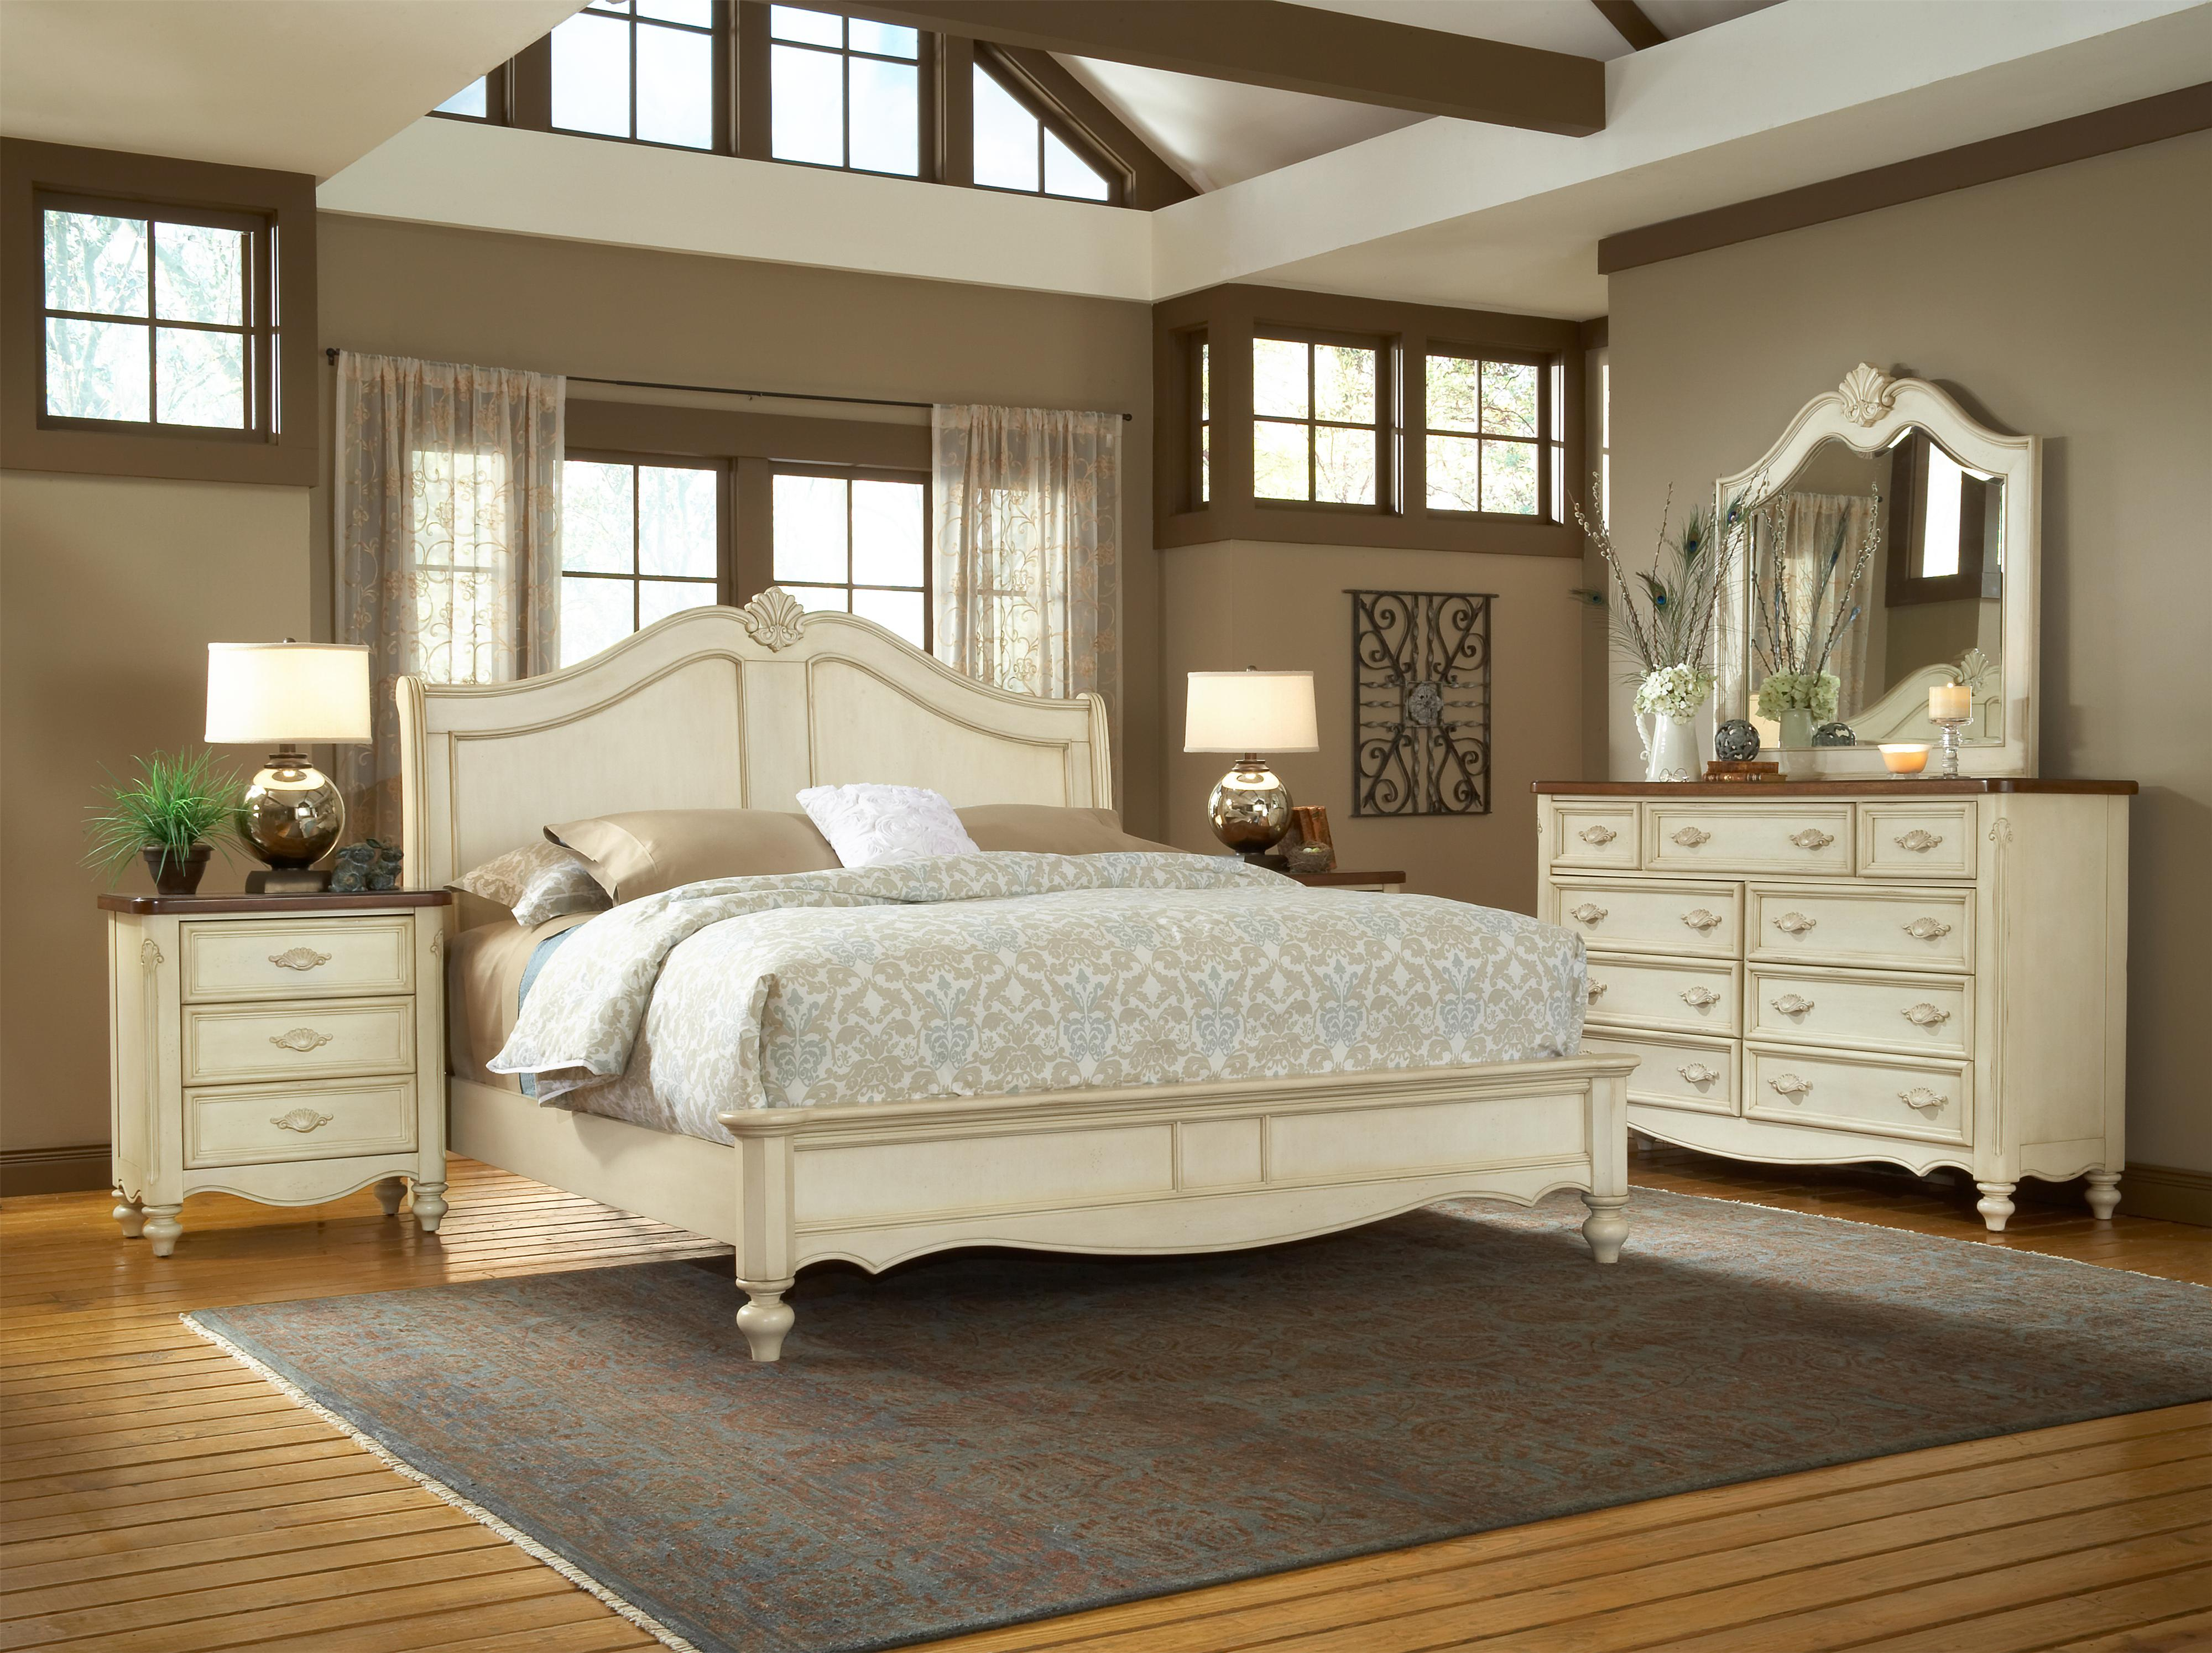 Chateau Queen Bedroom Group American Woodcrafters At Lindys Furniture Company throughout sizing 4000 X 2989